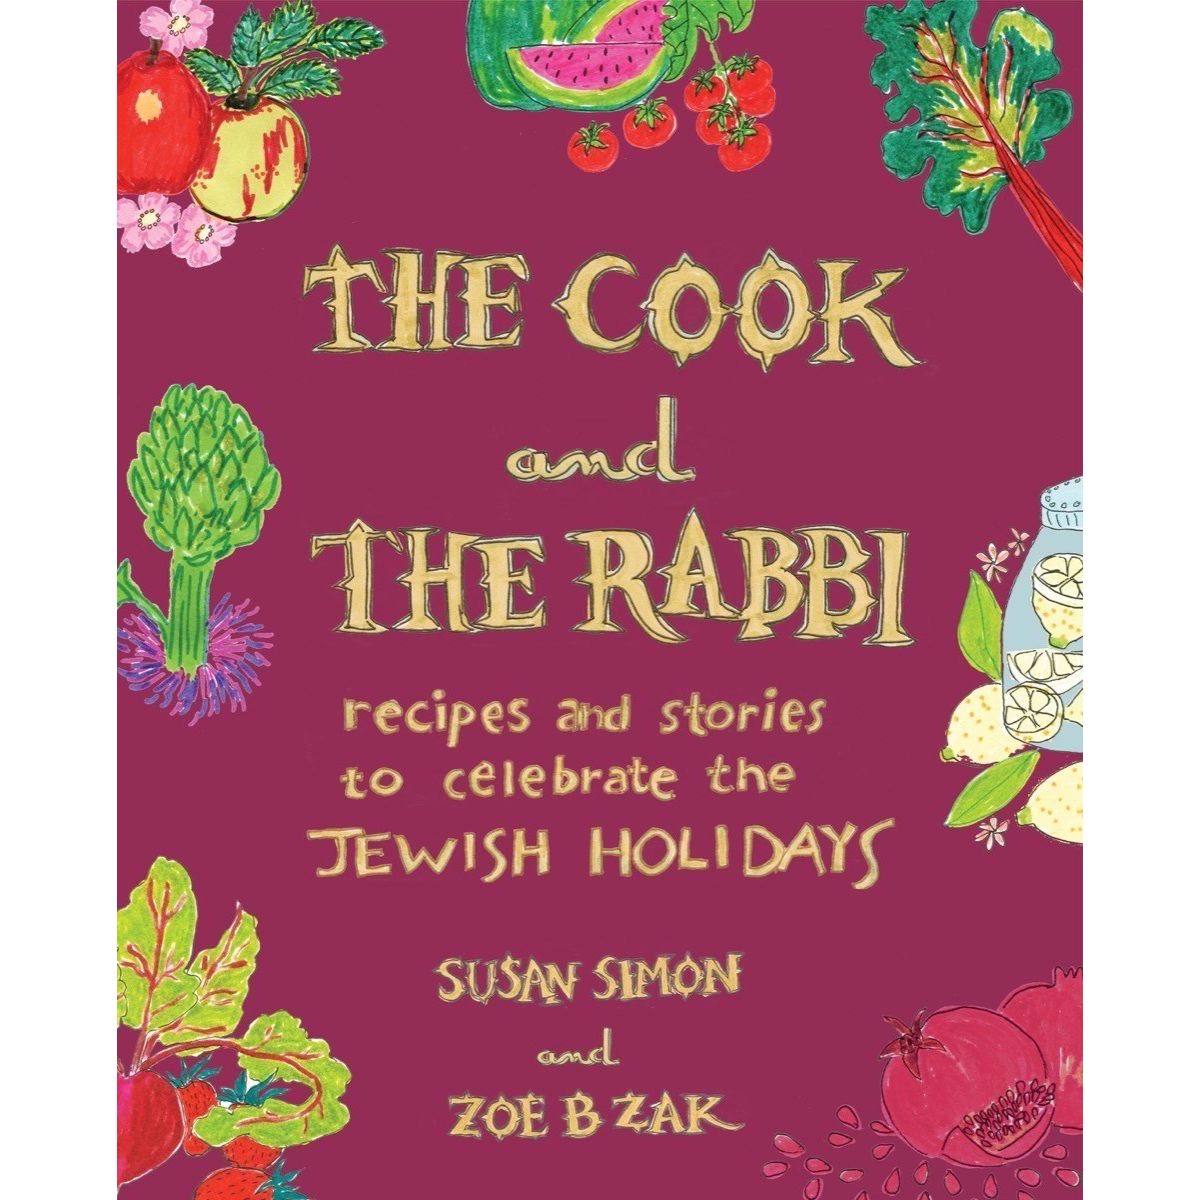 The Cook and the Rabbi : Recipes and Stories to Celebrate the Jewish Holidays (Susan Simon, Zoe B Zak)